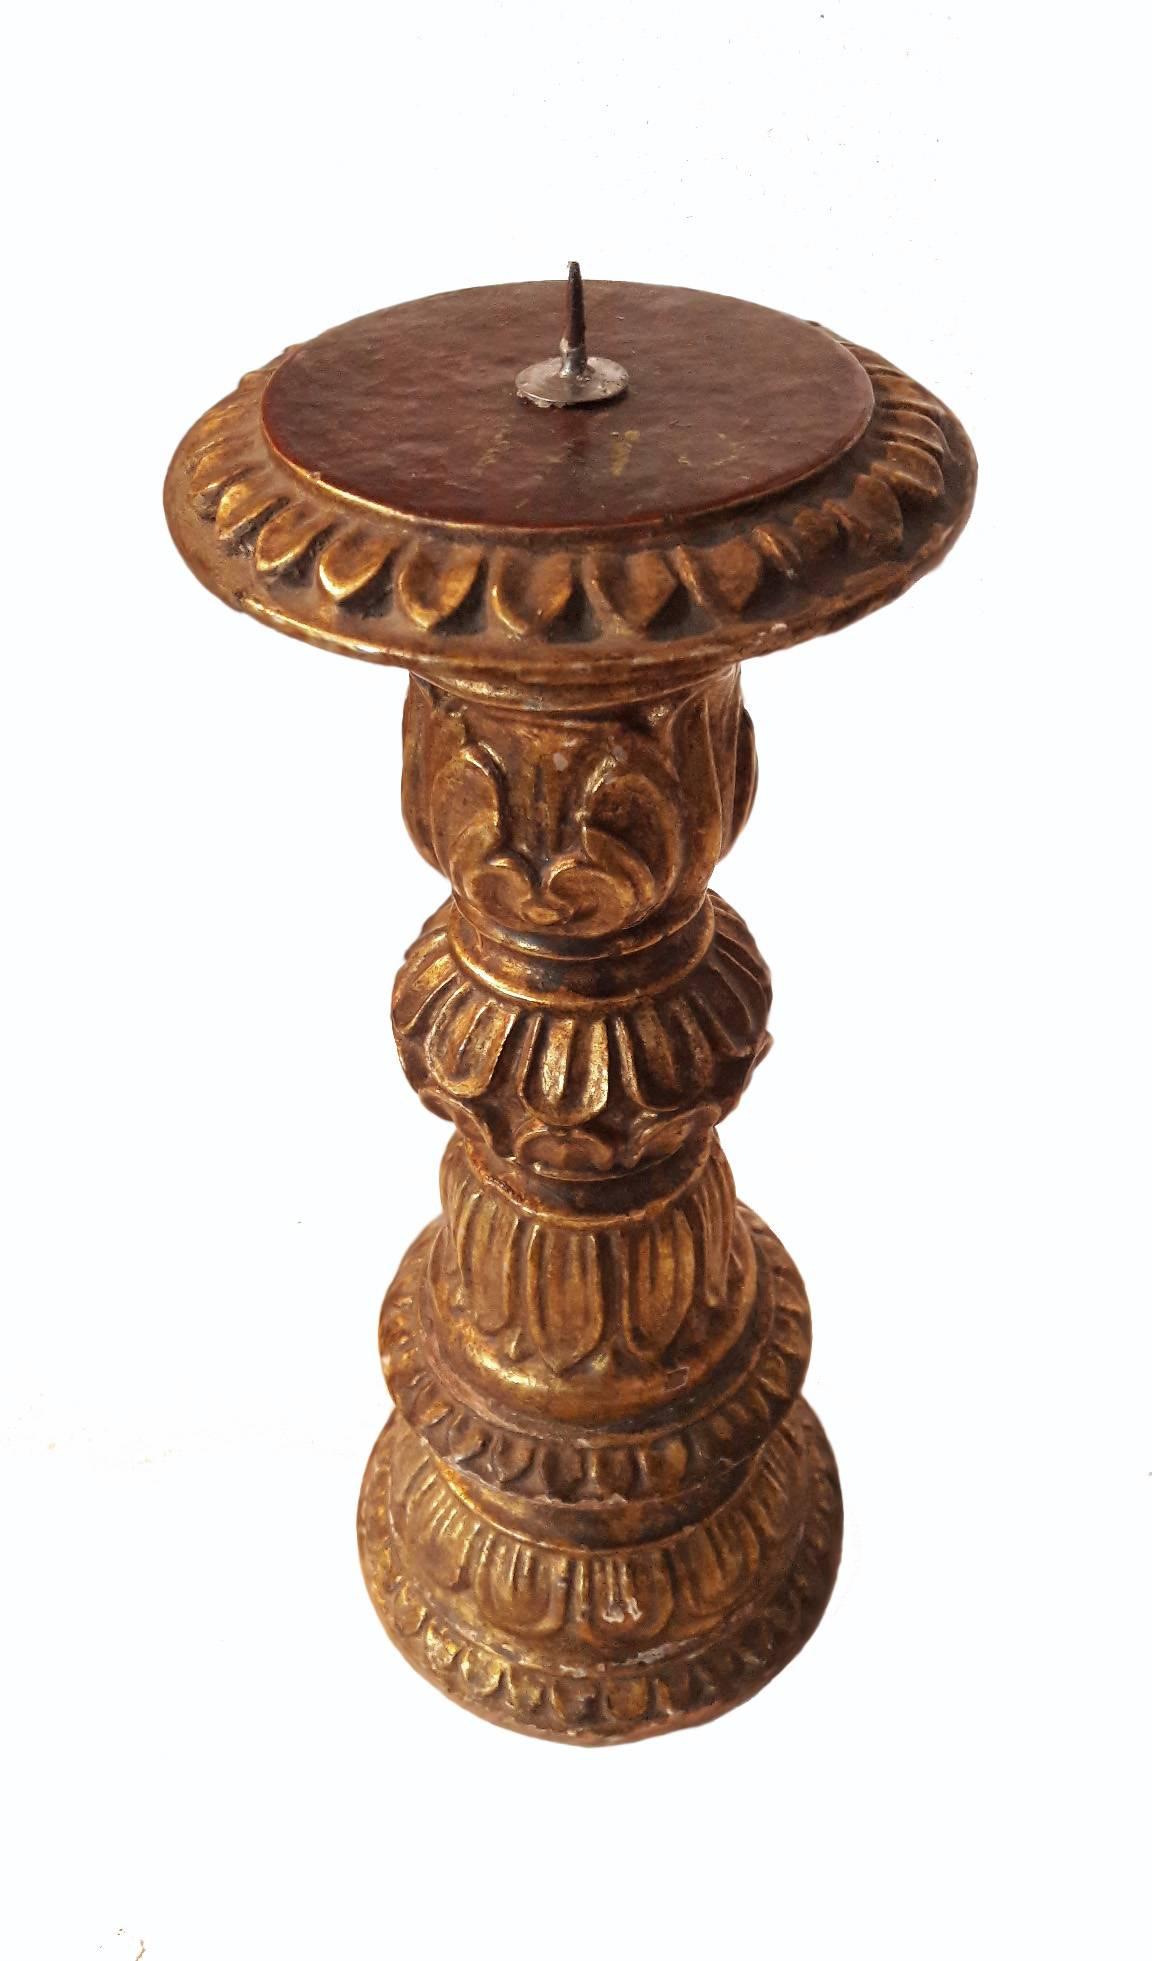 A gilded wood candlestick from India, ornately hand carved. Circa 1990. 